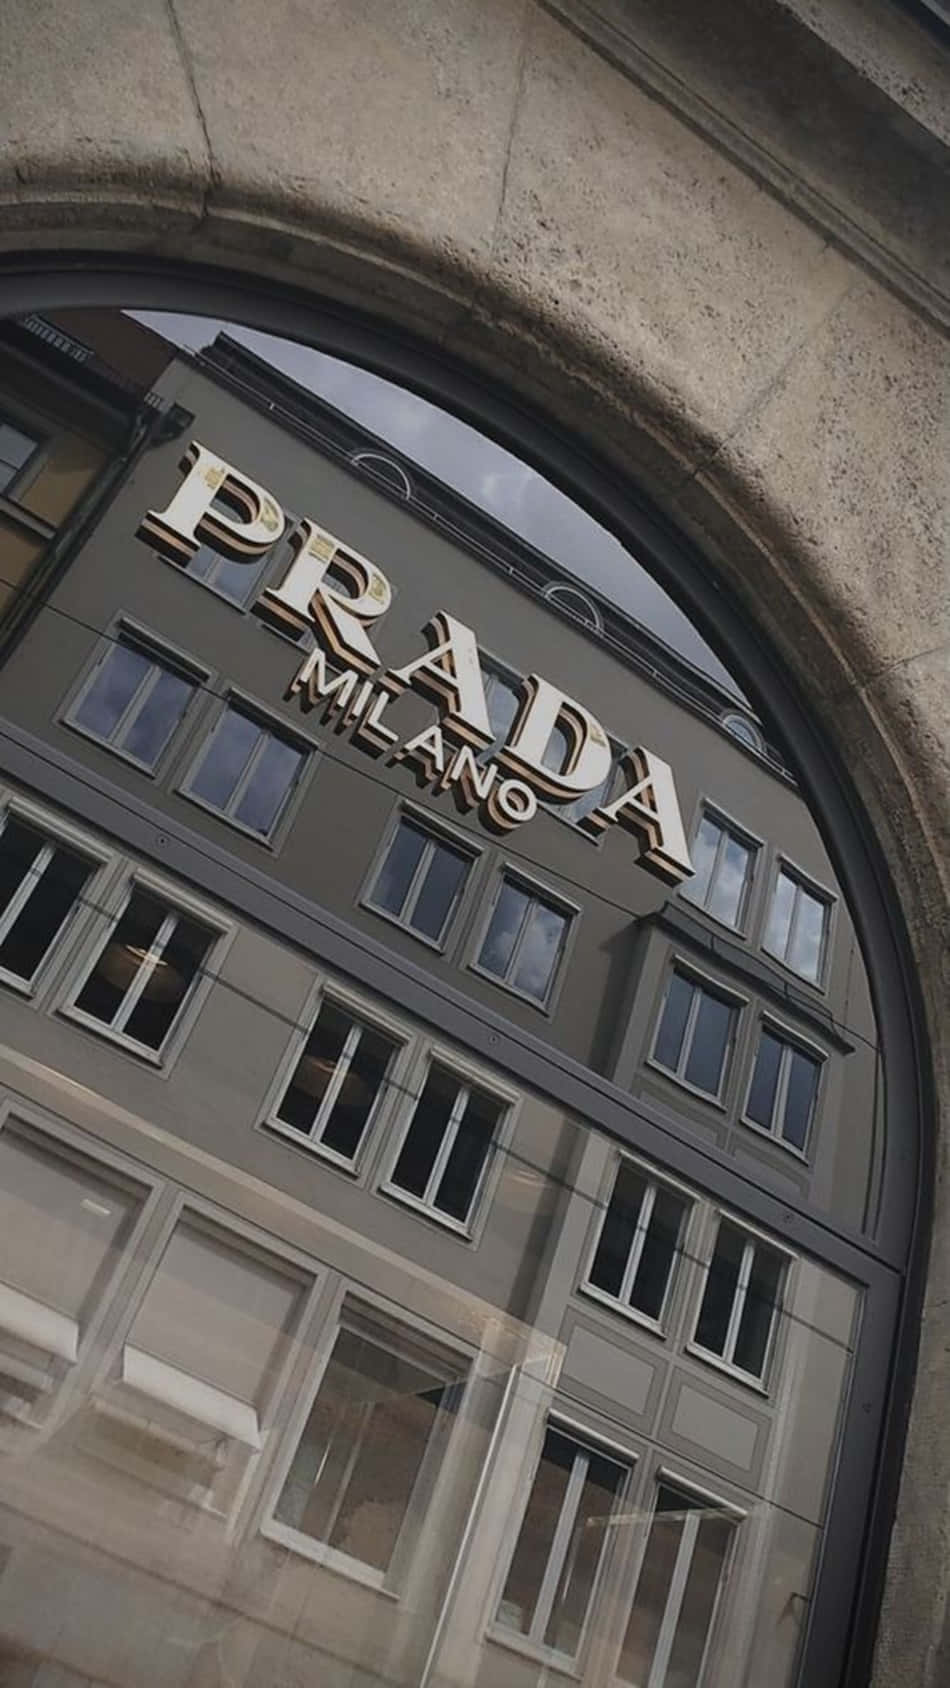 Prada - A Mirrored Building With A Sign Wallpaper